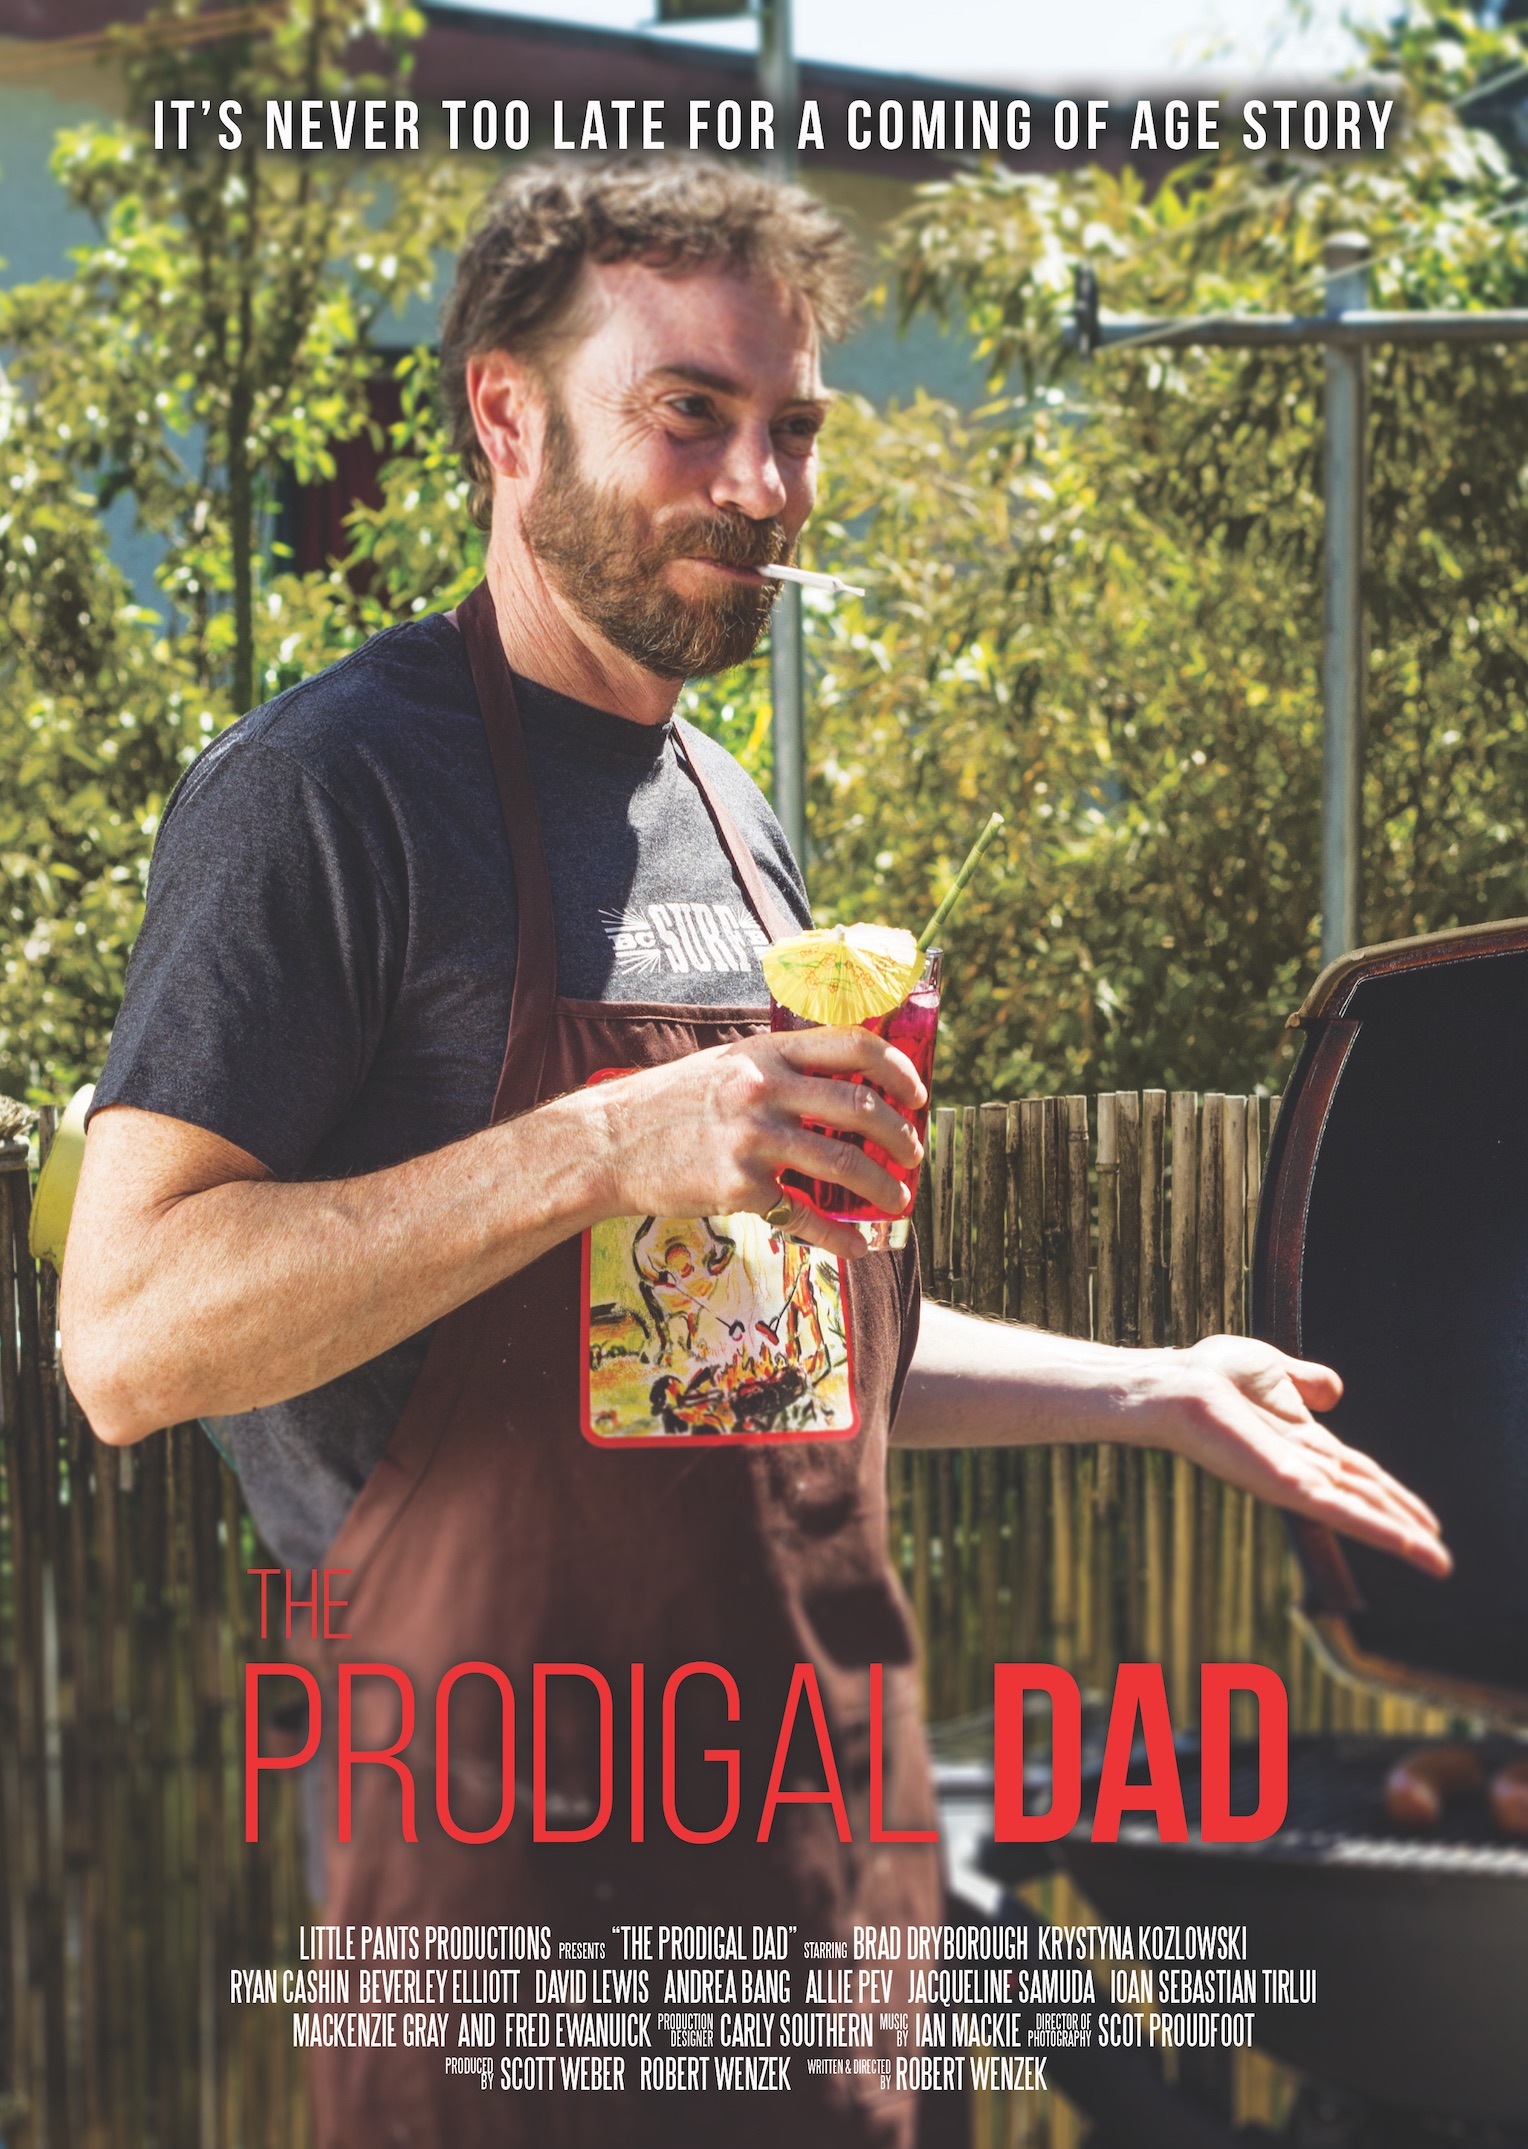 The Prodigal Dad (WFF Review)